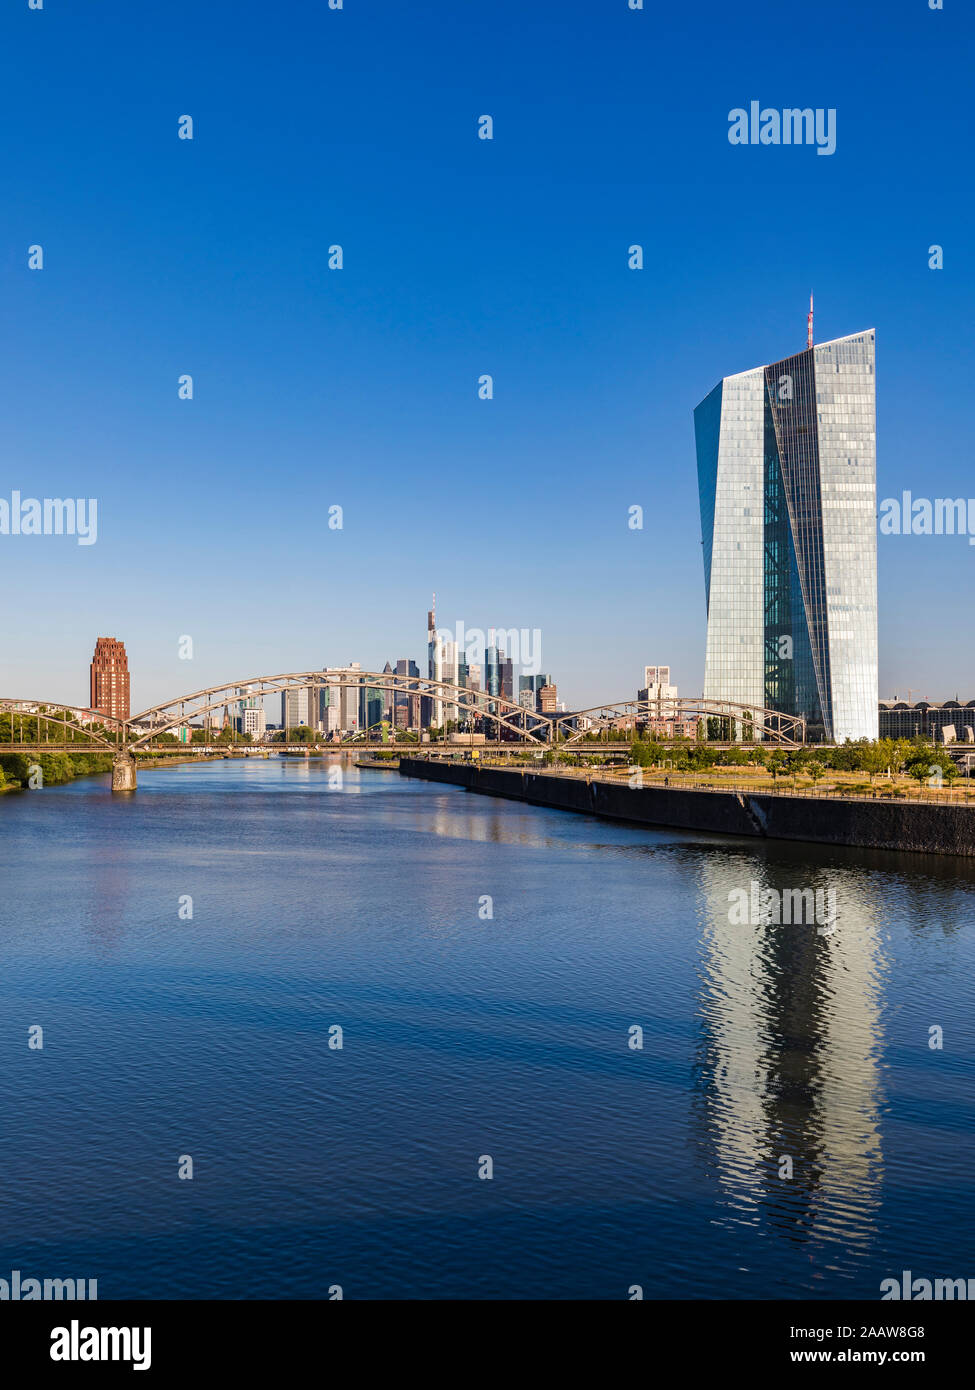 Scenic view of River Main against clear sky in Frankfurt, Germany Stock Photo